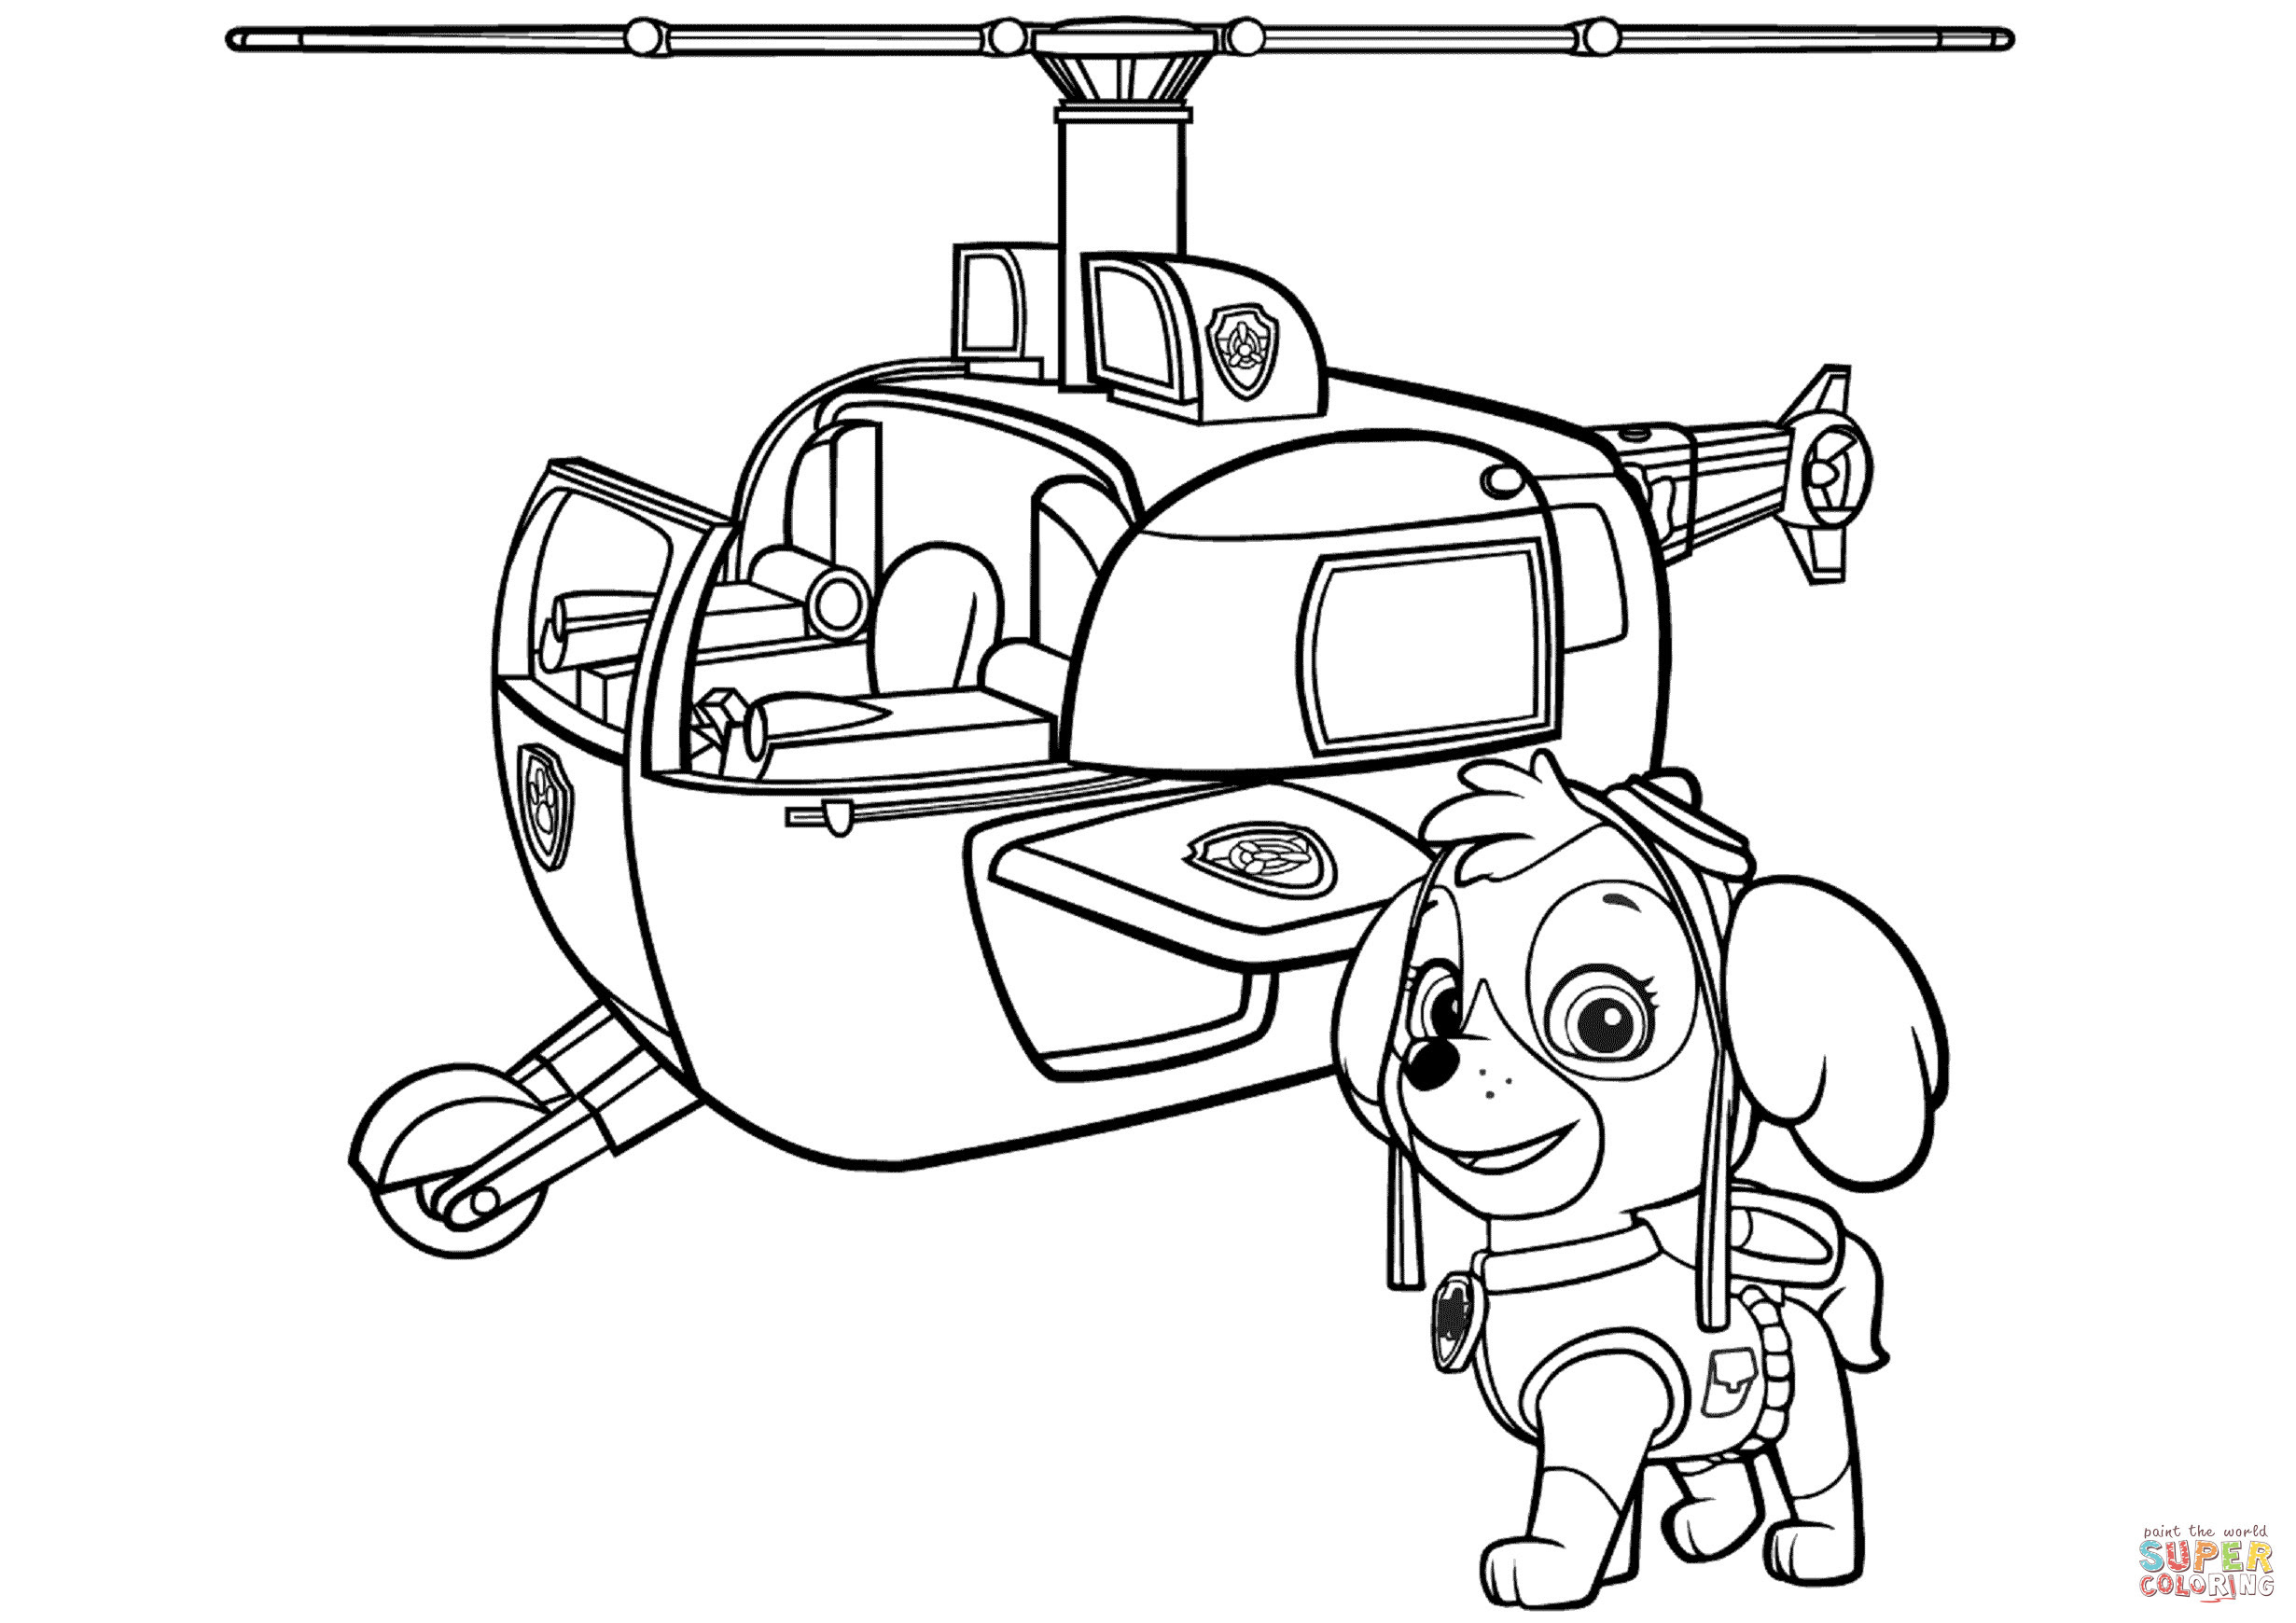 Select from 32346 printable crafts of cartoons nature animals bible and many more. Paw Patrol Vehicles Coloring Pages At Getdrawings Free Download